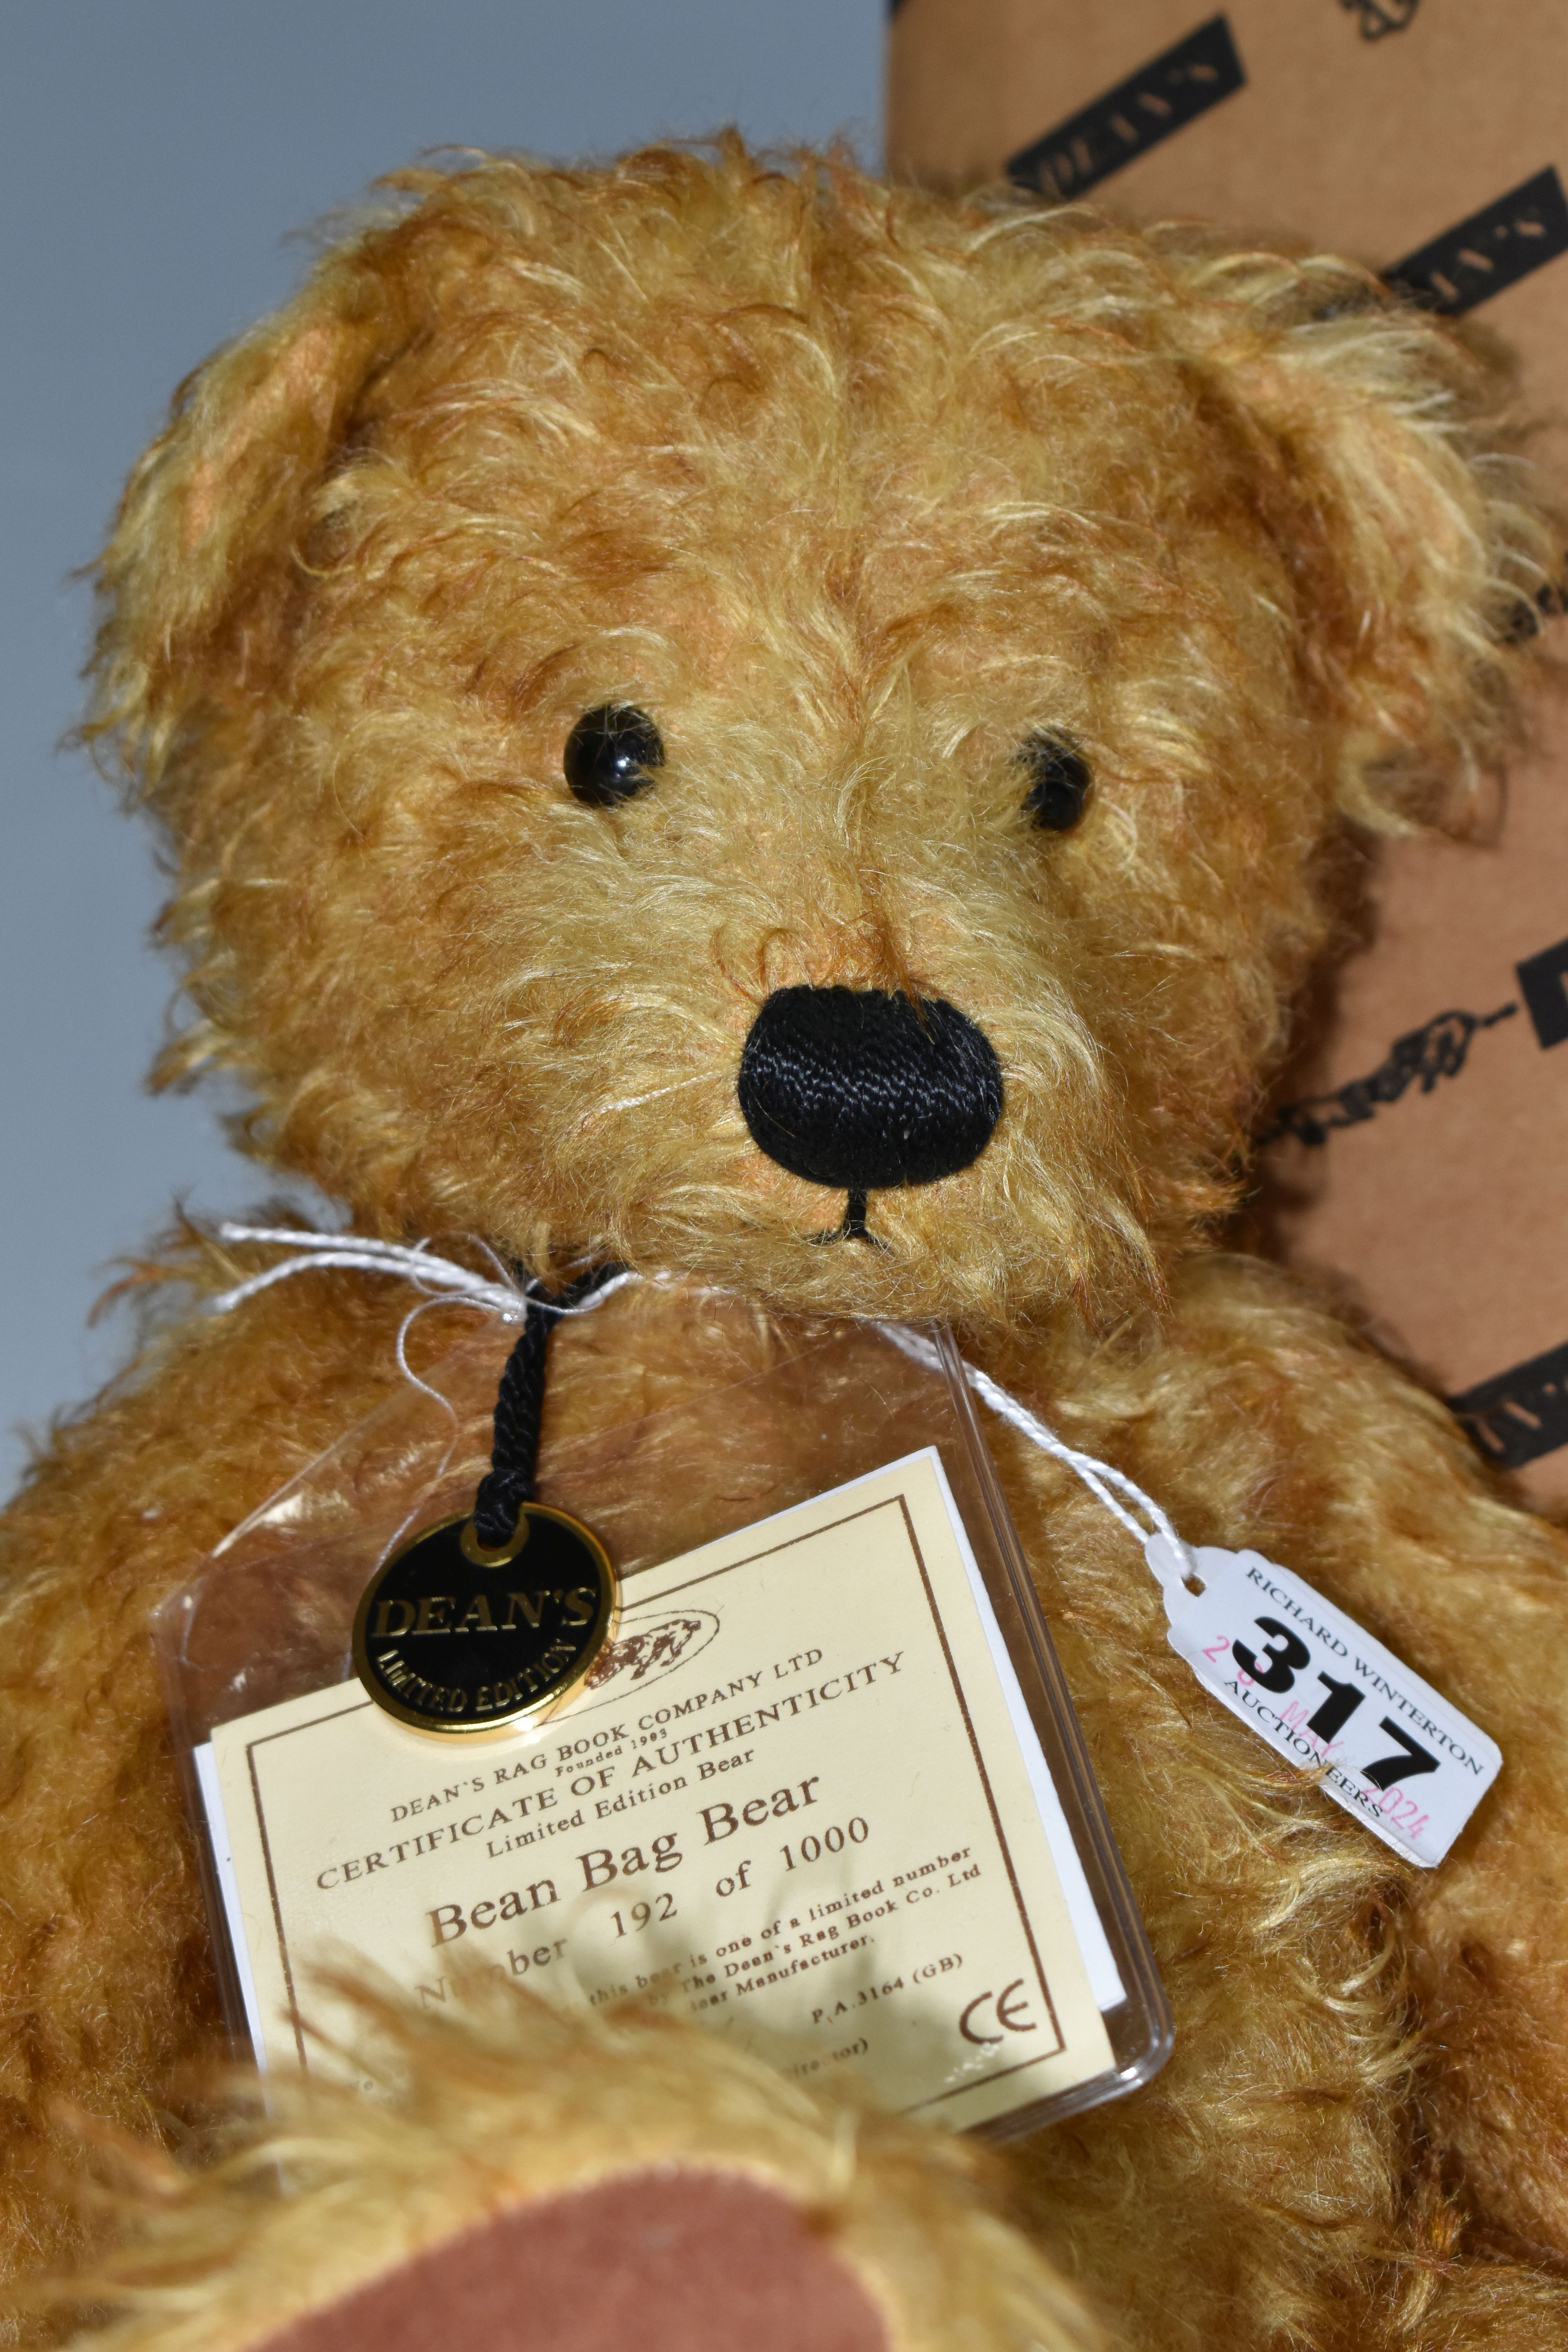 A BOXED LIMITED EDITION DEAN'S RAG BOOK TEDDY BEAR, 'Bean Bag Bear' with attached certificate - Bild 2 aus 3